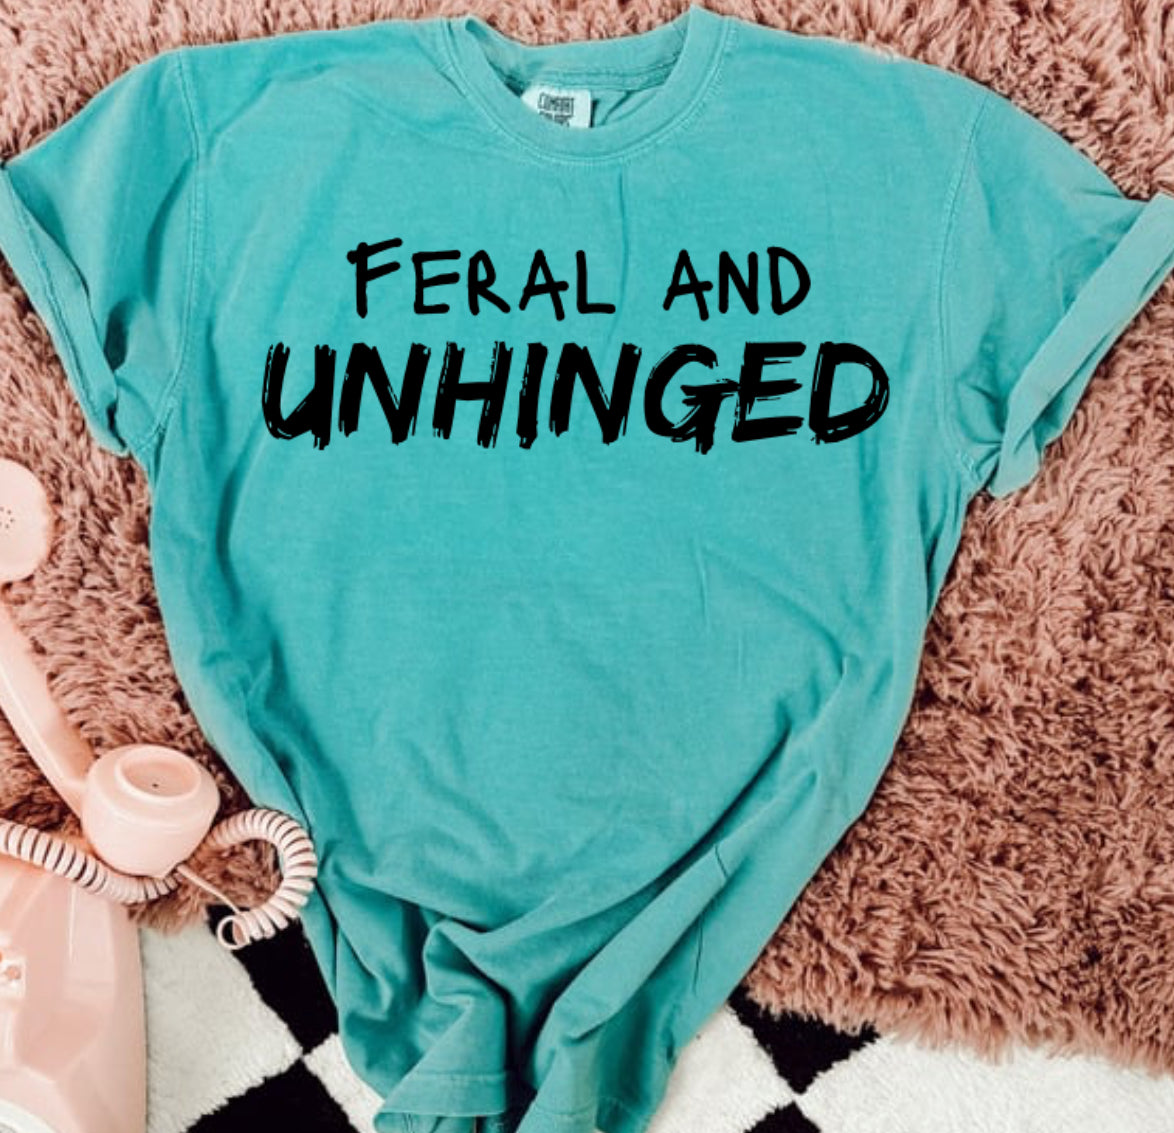 Feral and Unhinged Tee